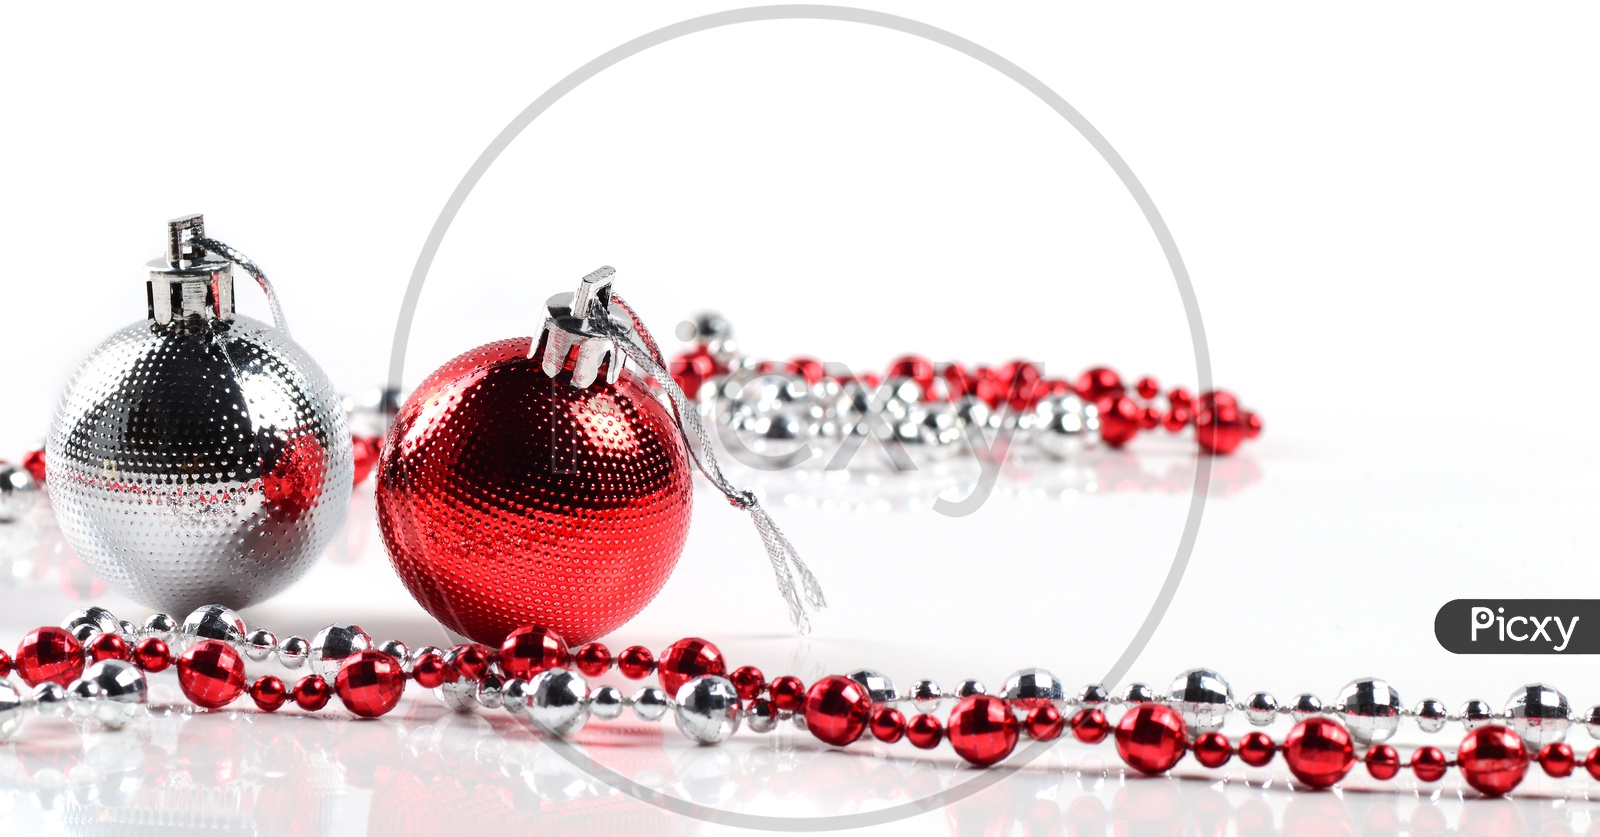 Christmas balls with ornaments on white background.